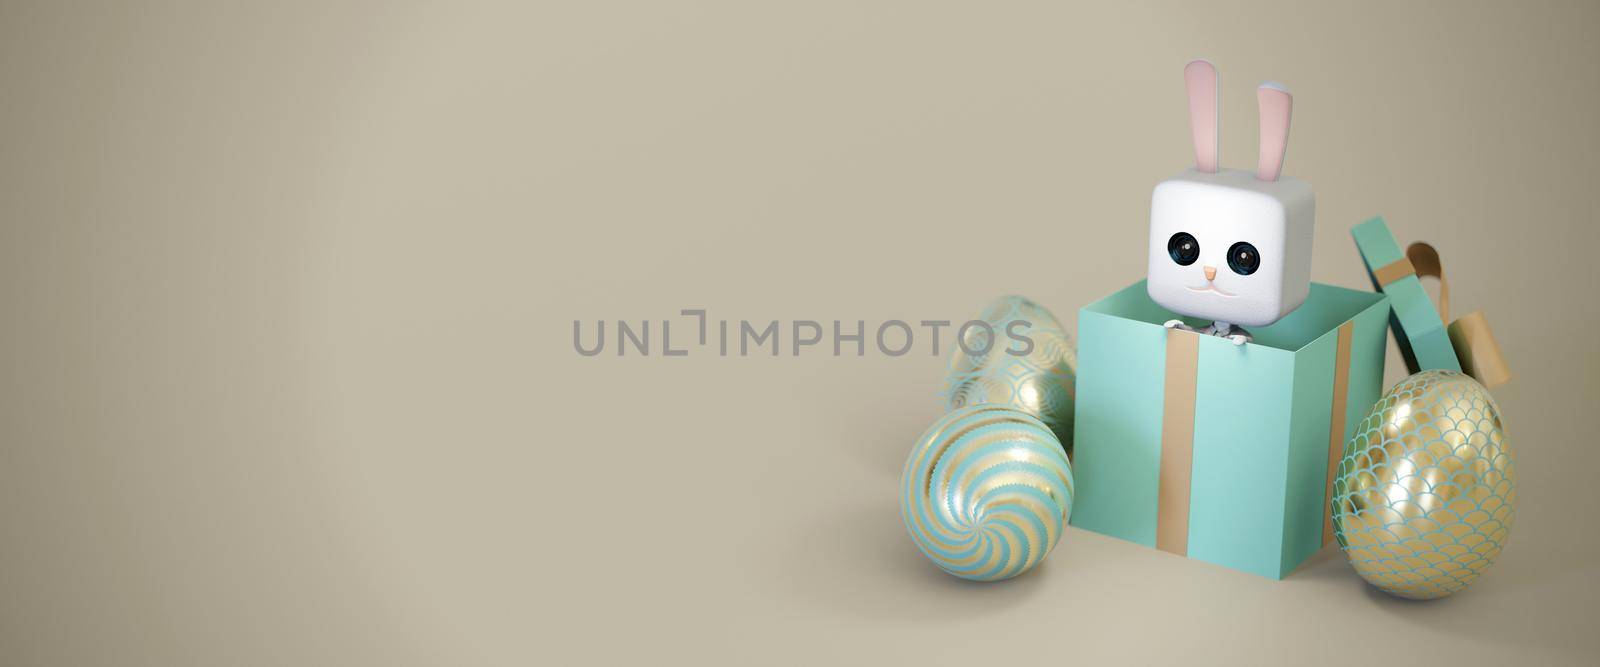 3d illustration. Easter concept. copy space for text . Web banner format by Hepjam